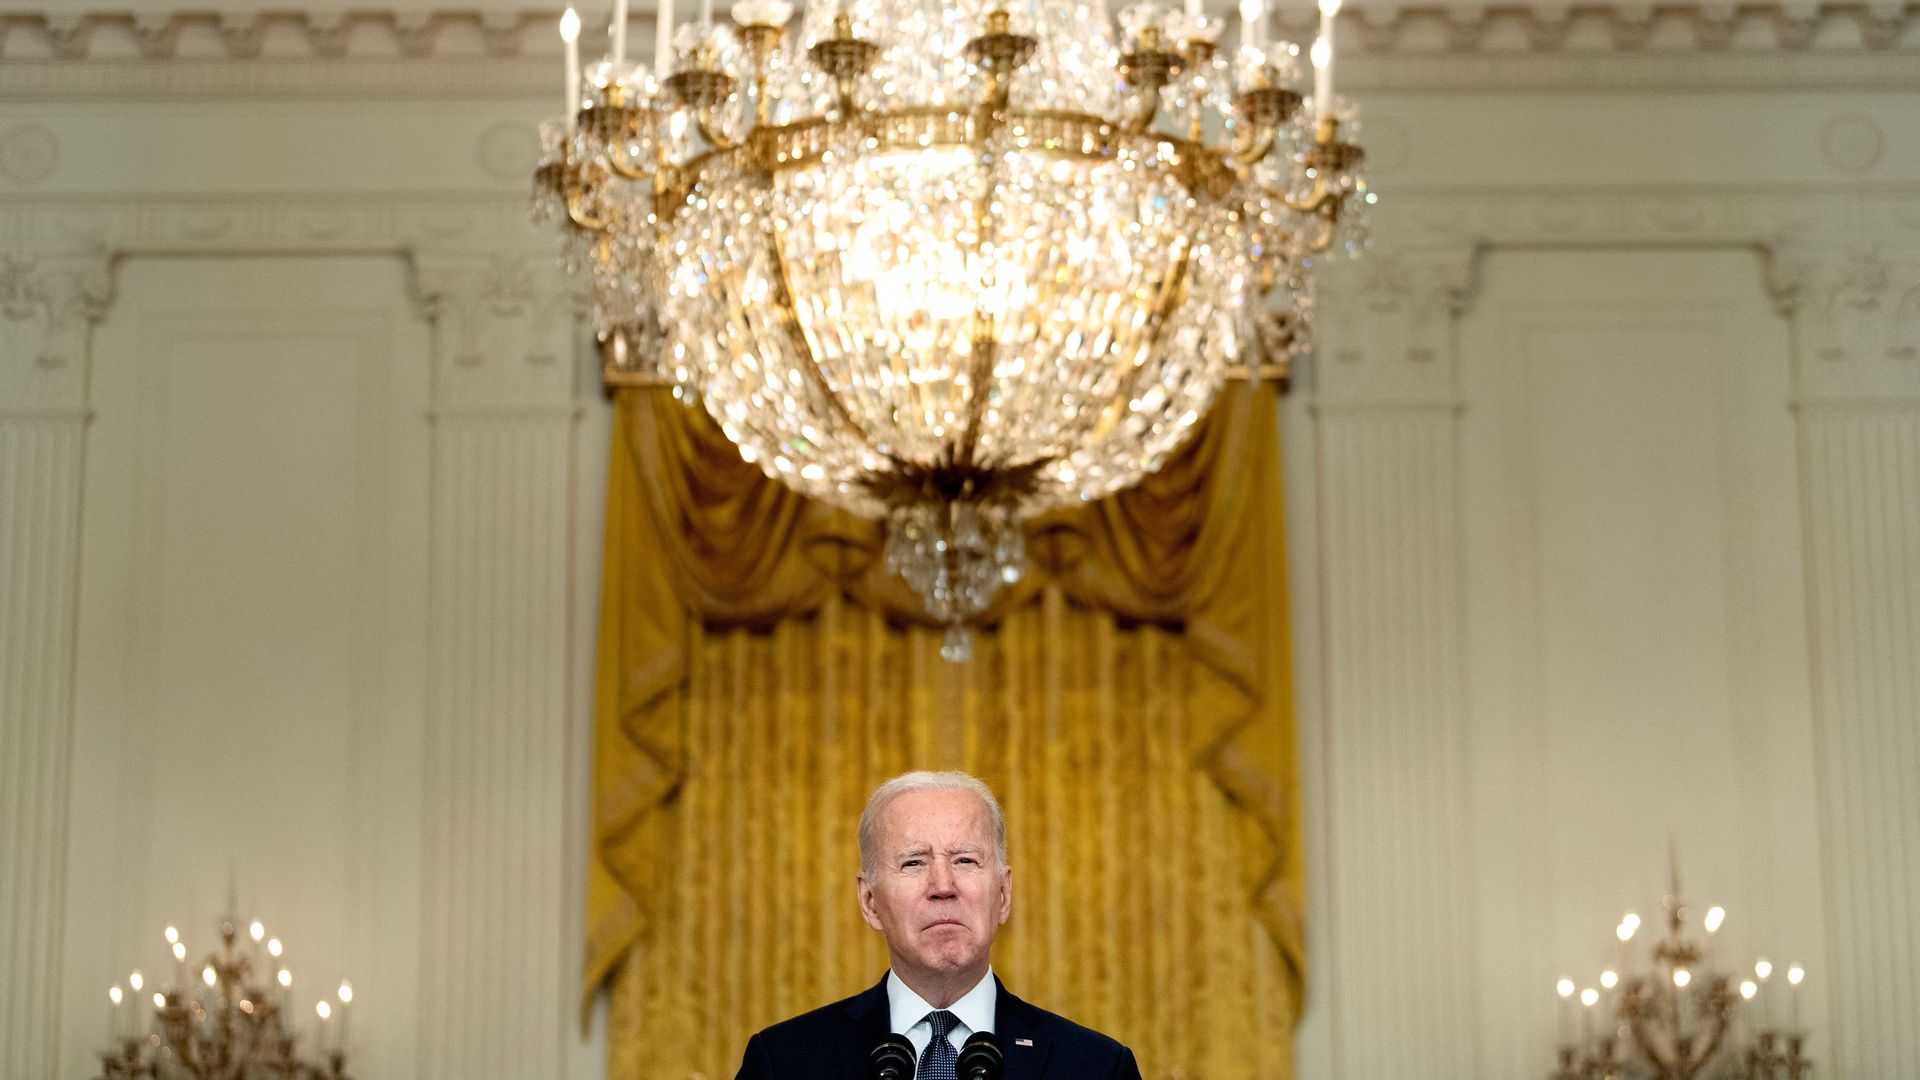 President Biden is seen in the East Room delivering remarks about Russia.